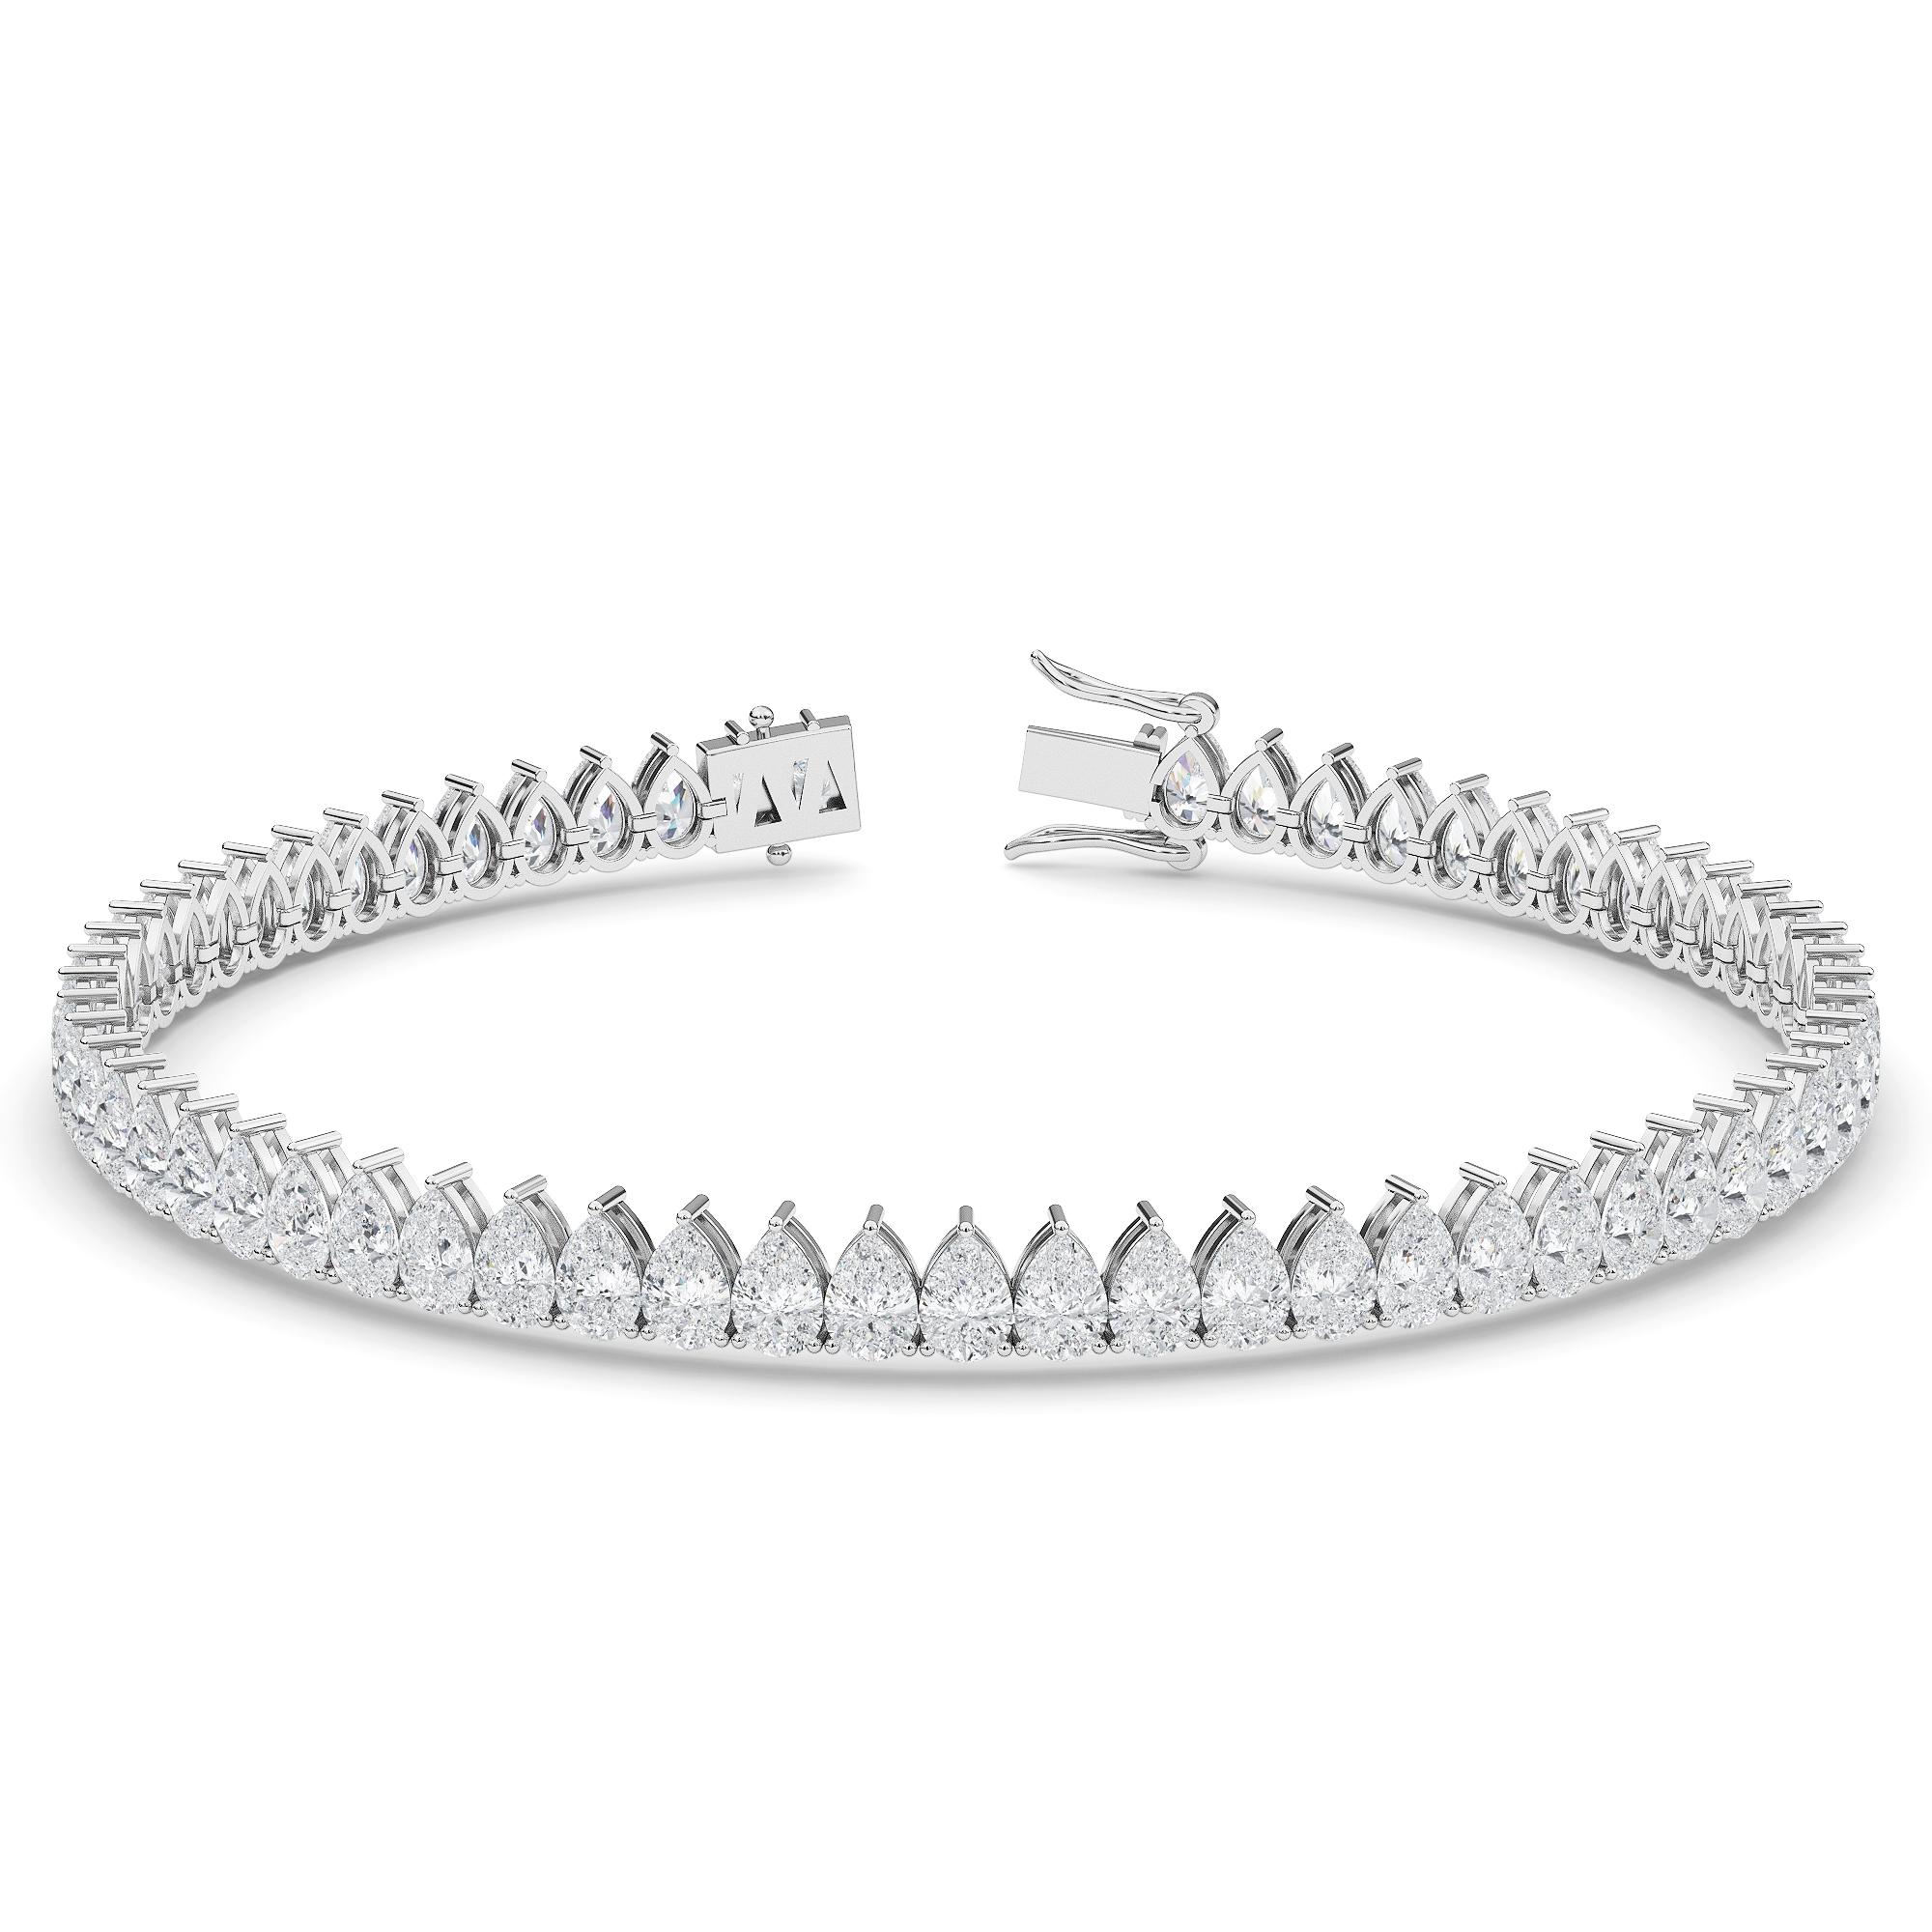 Timeless and elegance. This tennis bracelet sparkling with an infinite string of Pear Shape diamonds.

METAL DETAILS: 18K White Gold l 
DIAMOND DETAILS: Natural, Ethically sourced &, Conflict free.
DIAMOND SHAPES :  Pear
DIAMOND WEIGHT (MINIMUM